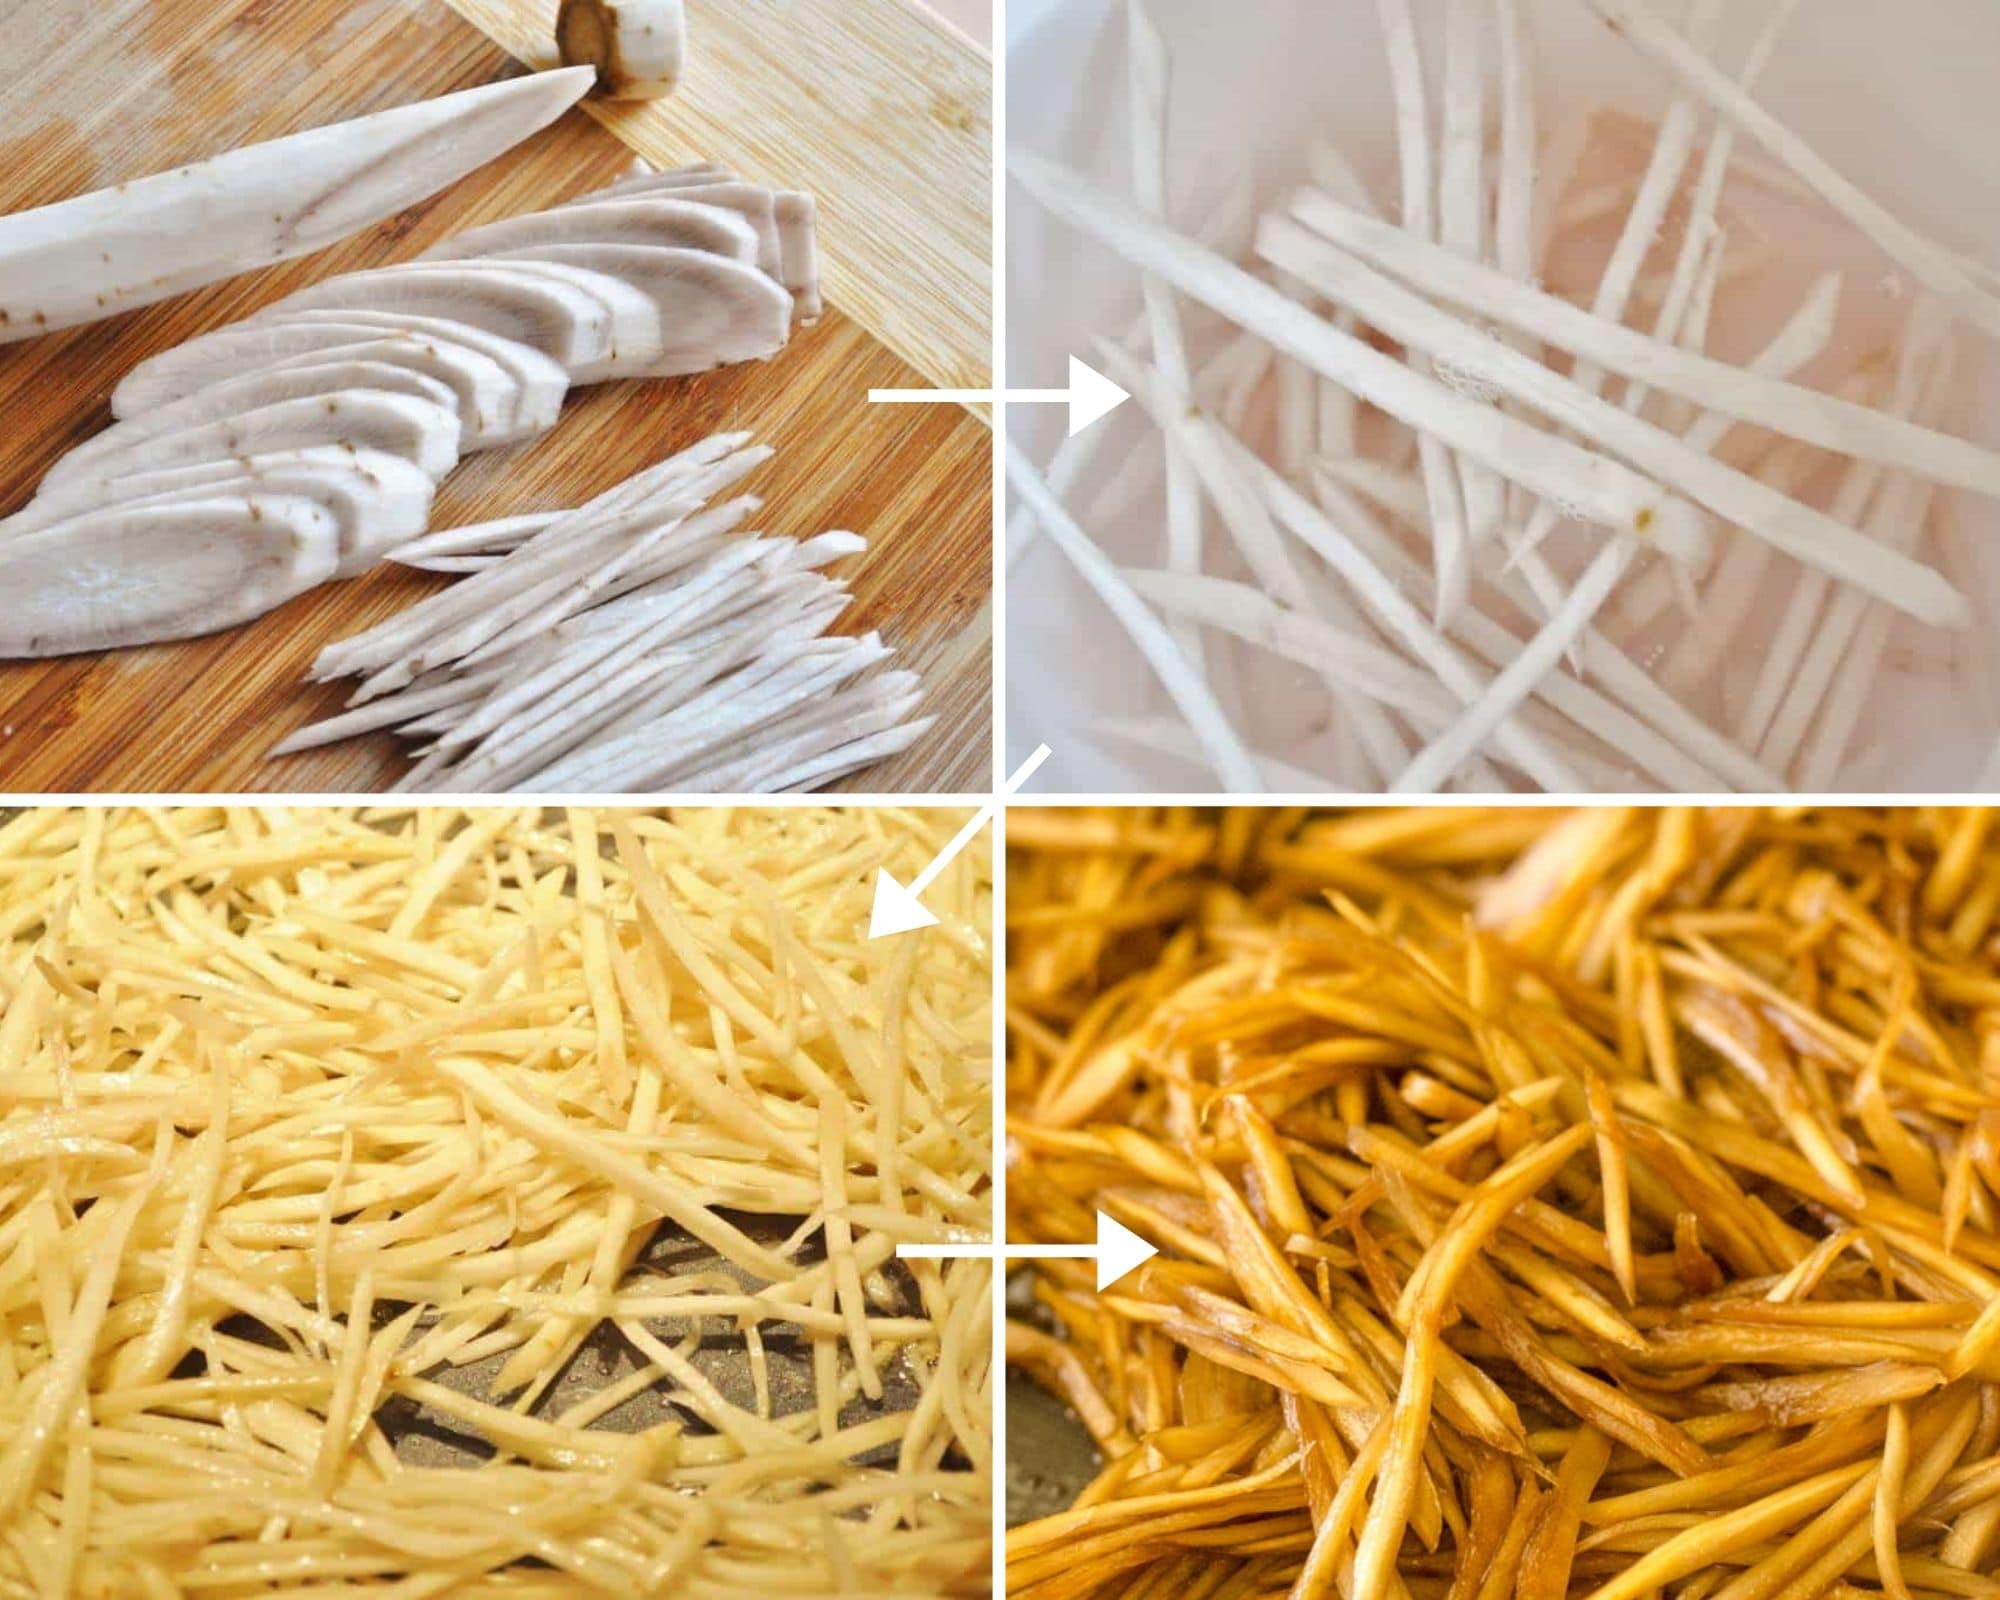 step by step pics of how to julienne and cook burdock roots